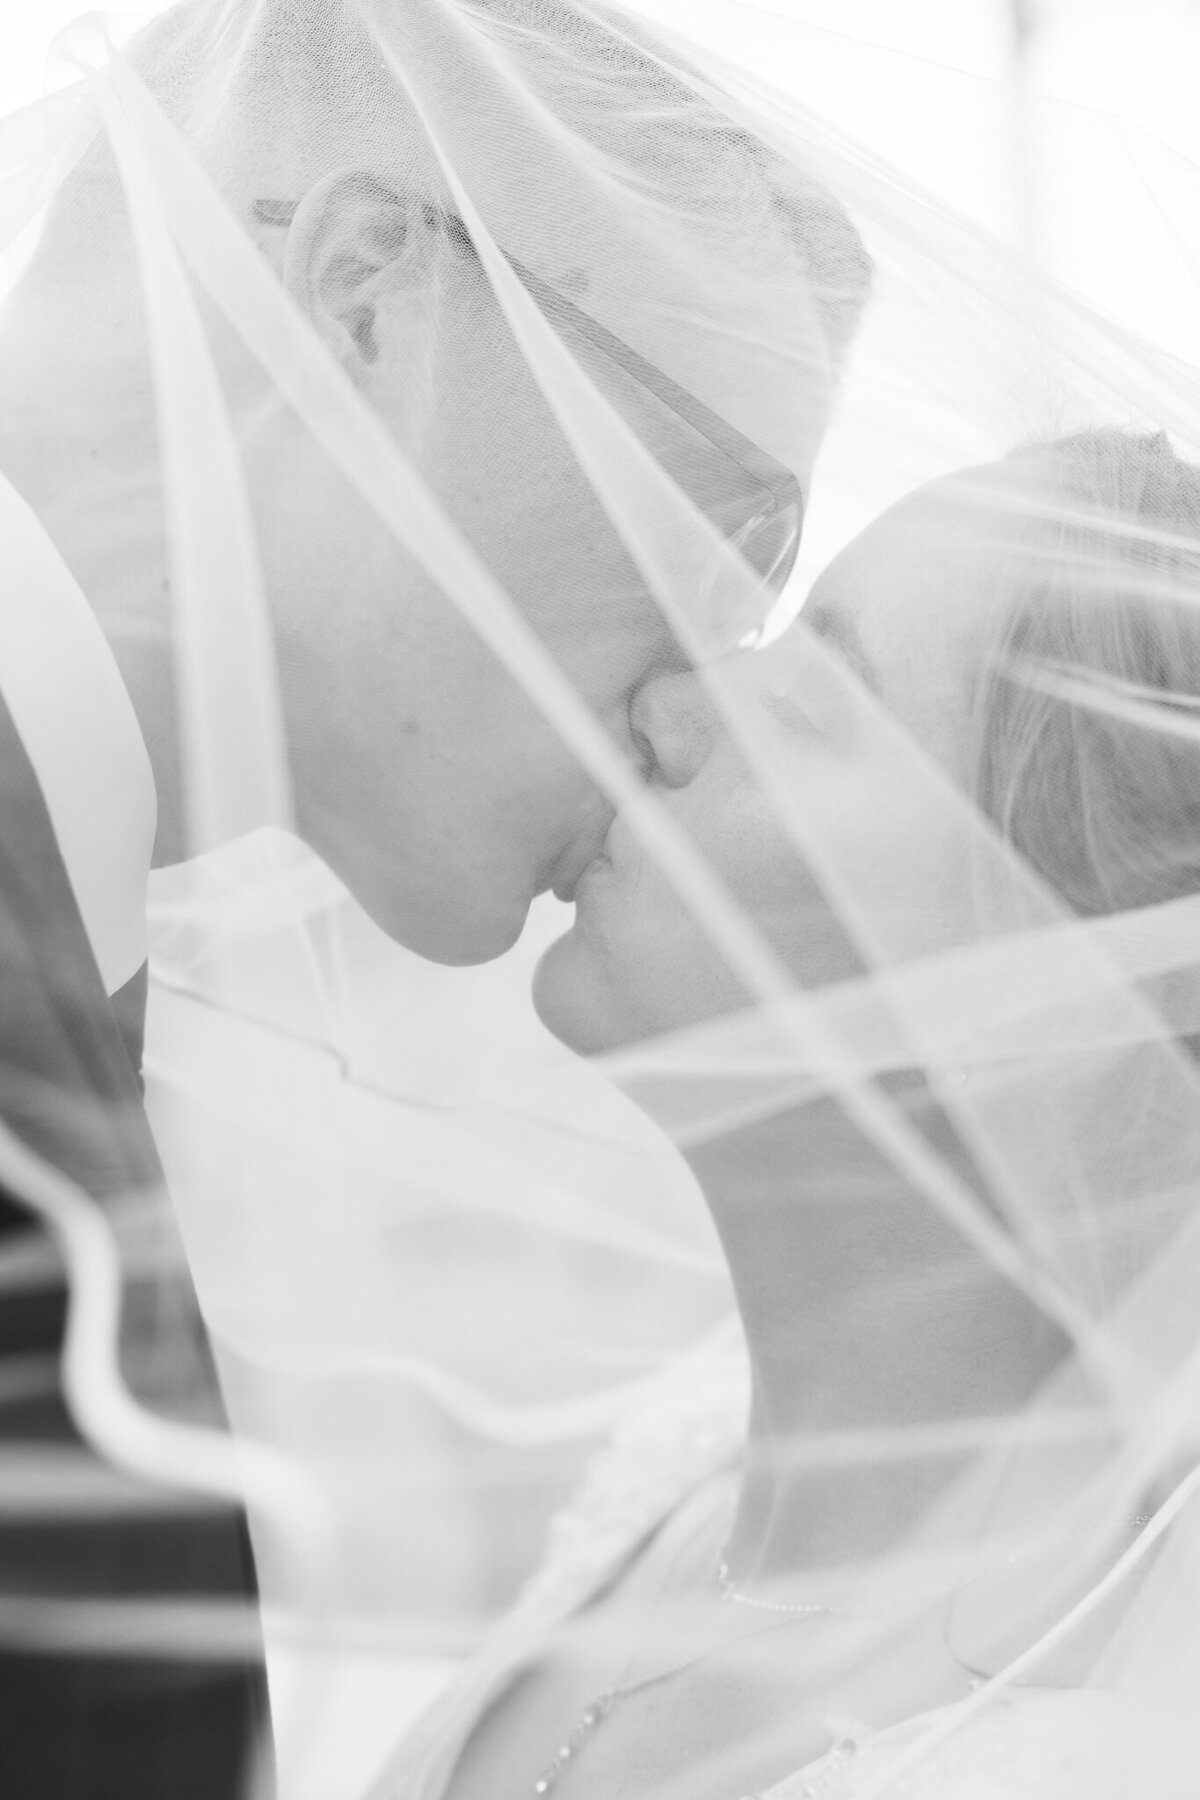 Bride and groom sharing a kiss under the veil on their wedding day talen by spokane wedding photographer